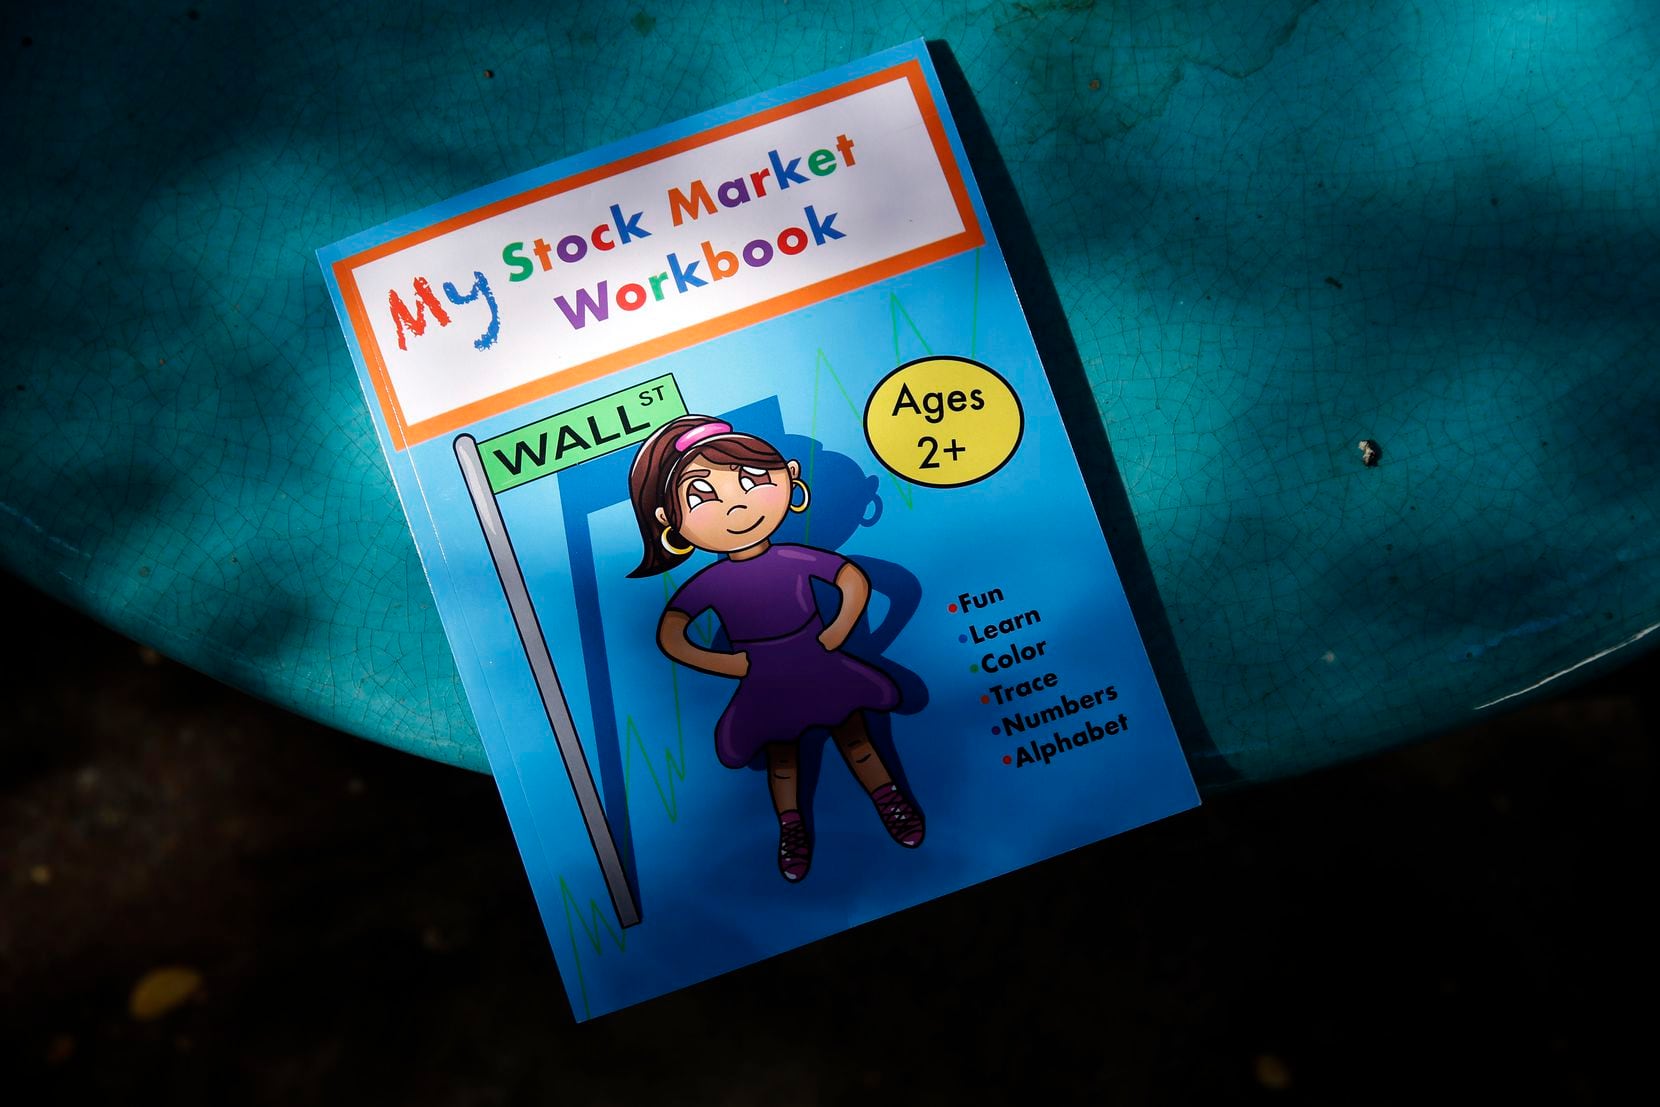 The mother-daughter duo of Linda Garcia and Elizabeth Ruiz wrote "My Stock Market Workbook," which seeks to teach young children about investing and generational wealth in a coloring book. 